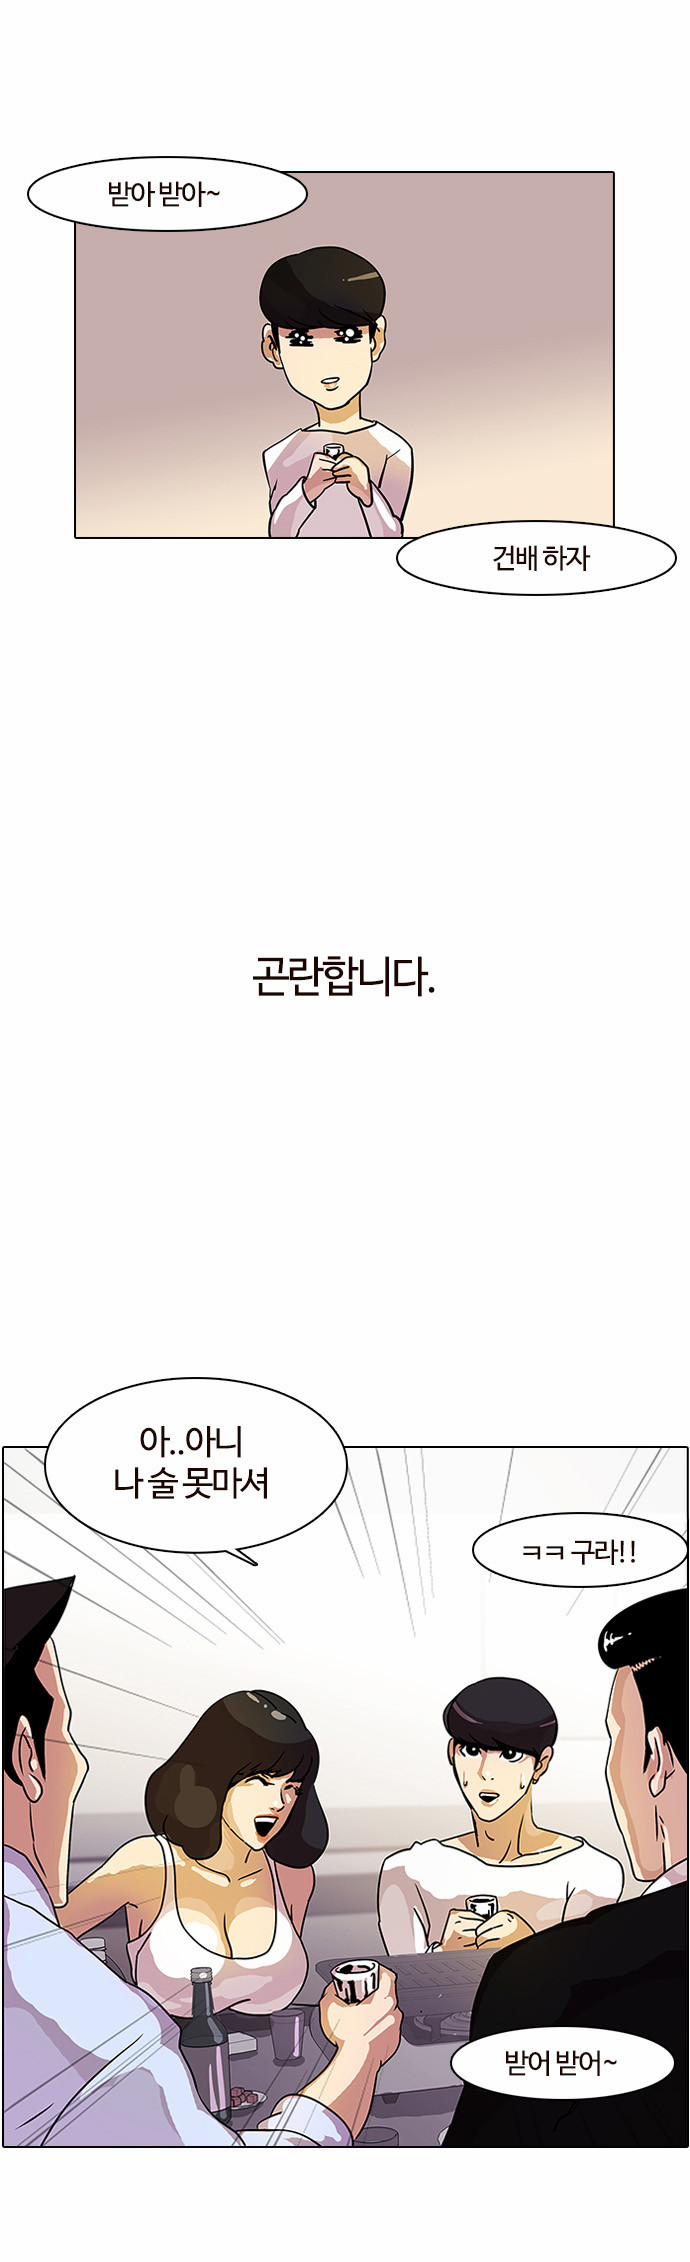 Lookism - Chapter 11 - Page 2